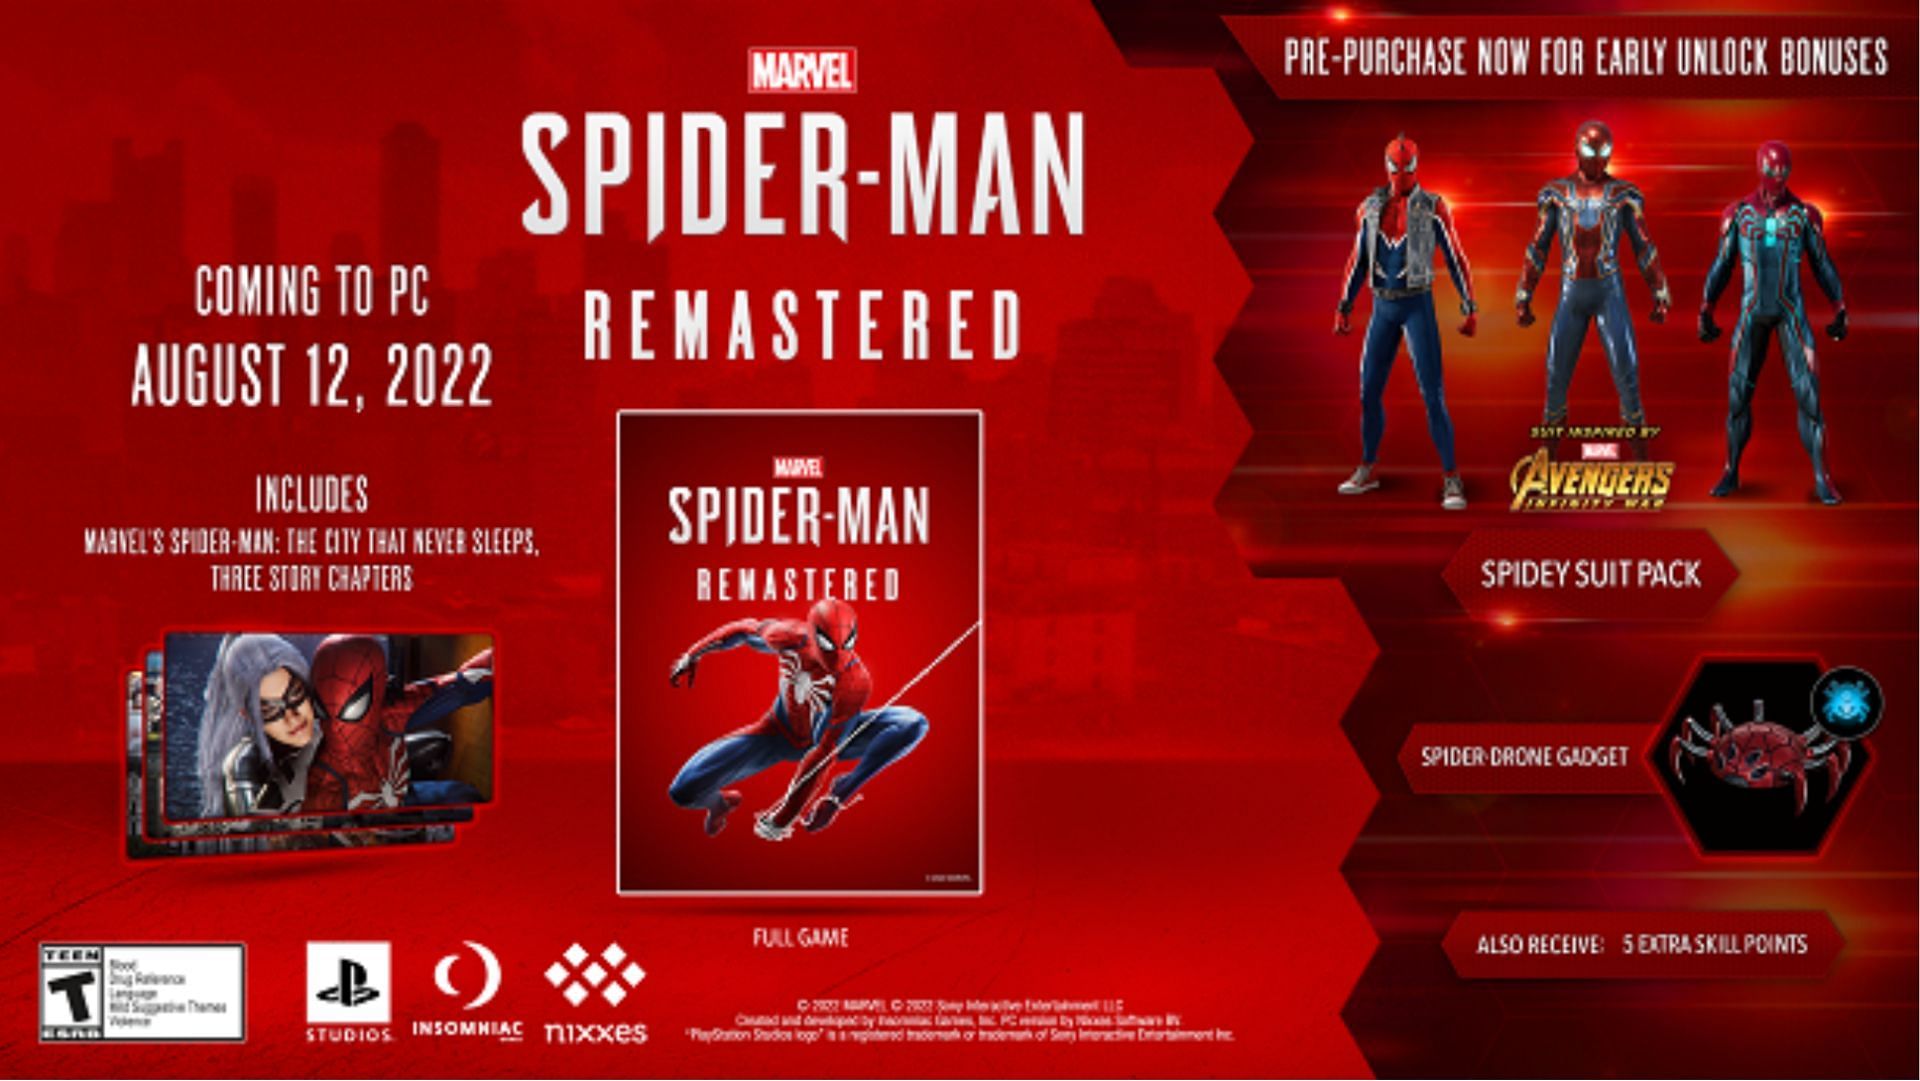 Marvel's Spider-Man Remastered  Download and Buy Today - Epic Games Store